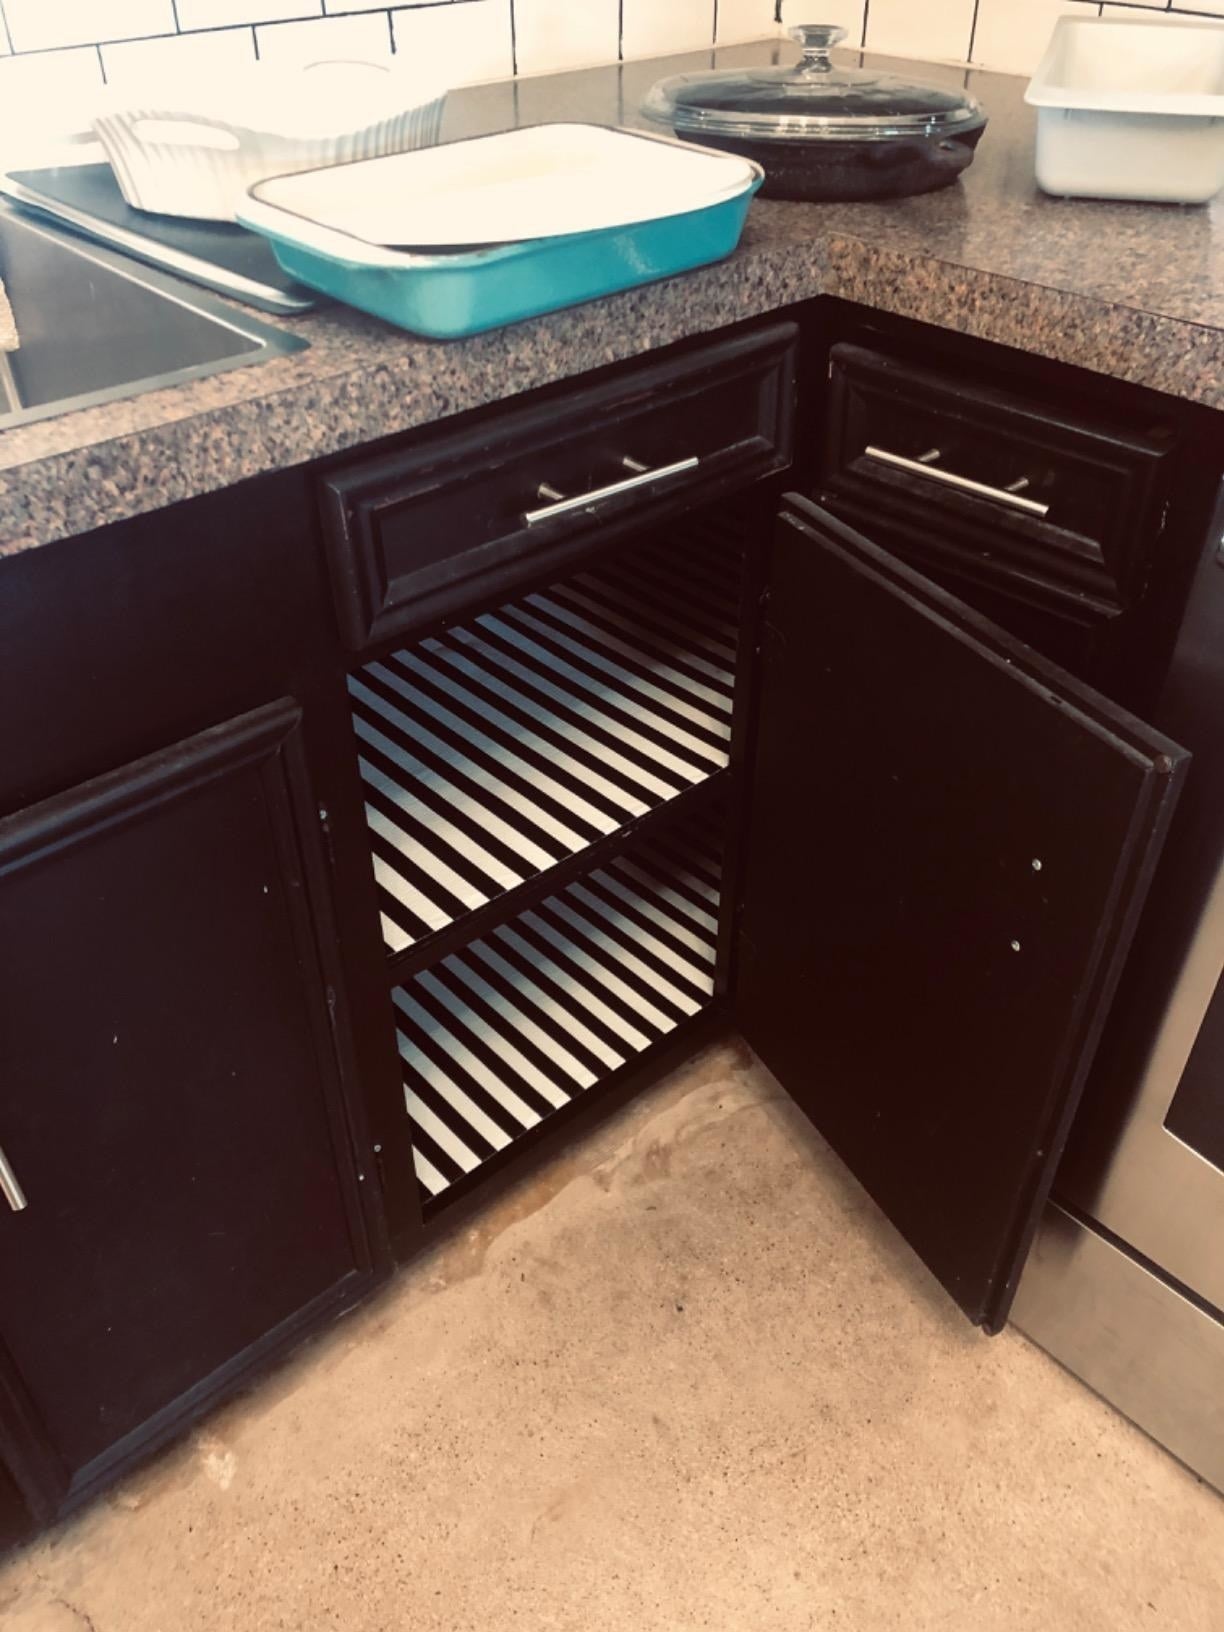 reviewer's cabinets lined with black and white striped liner